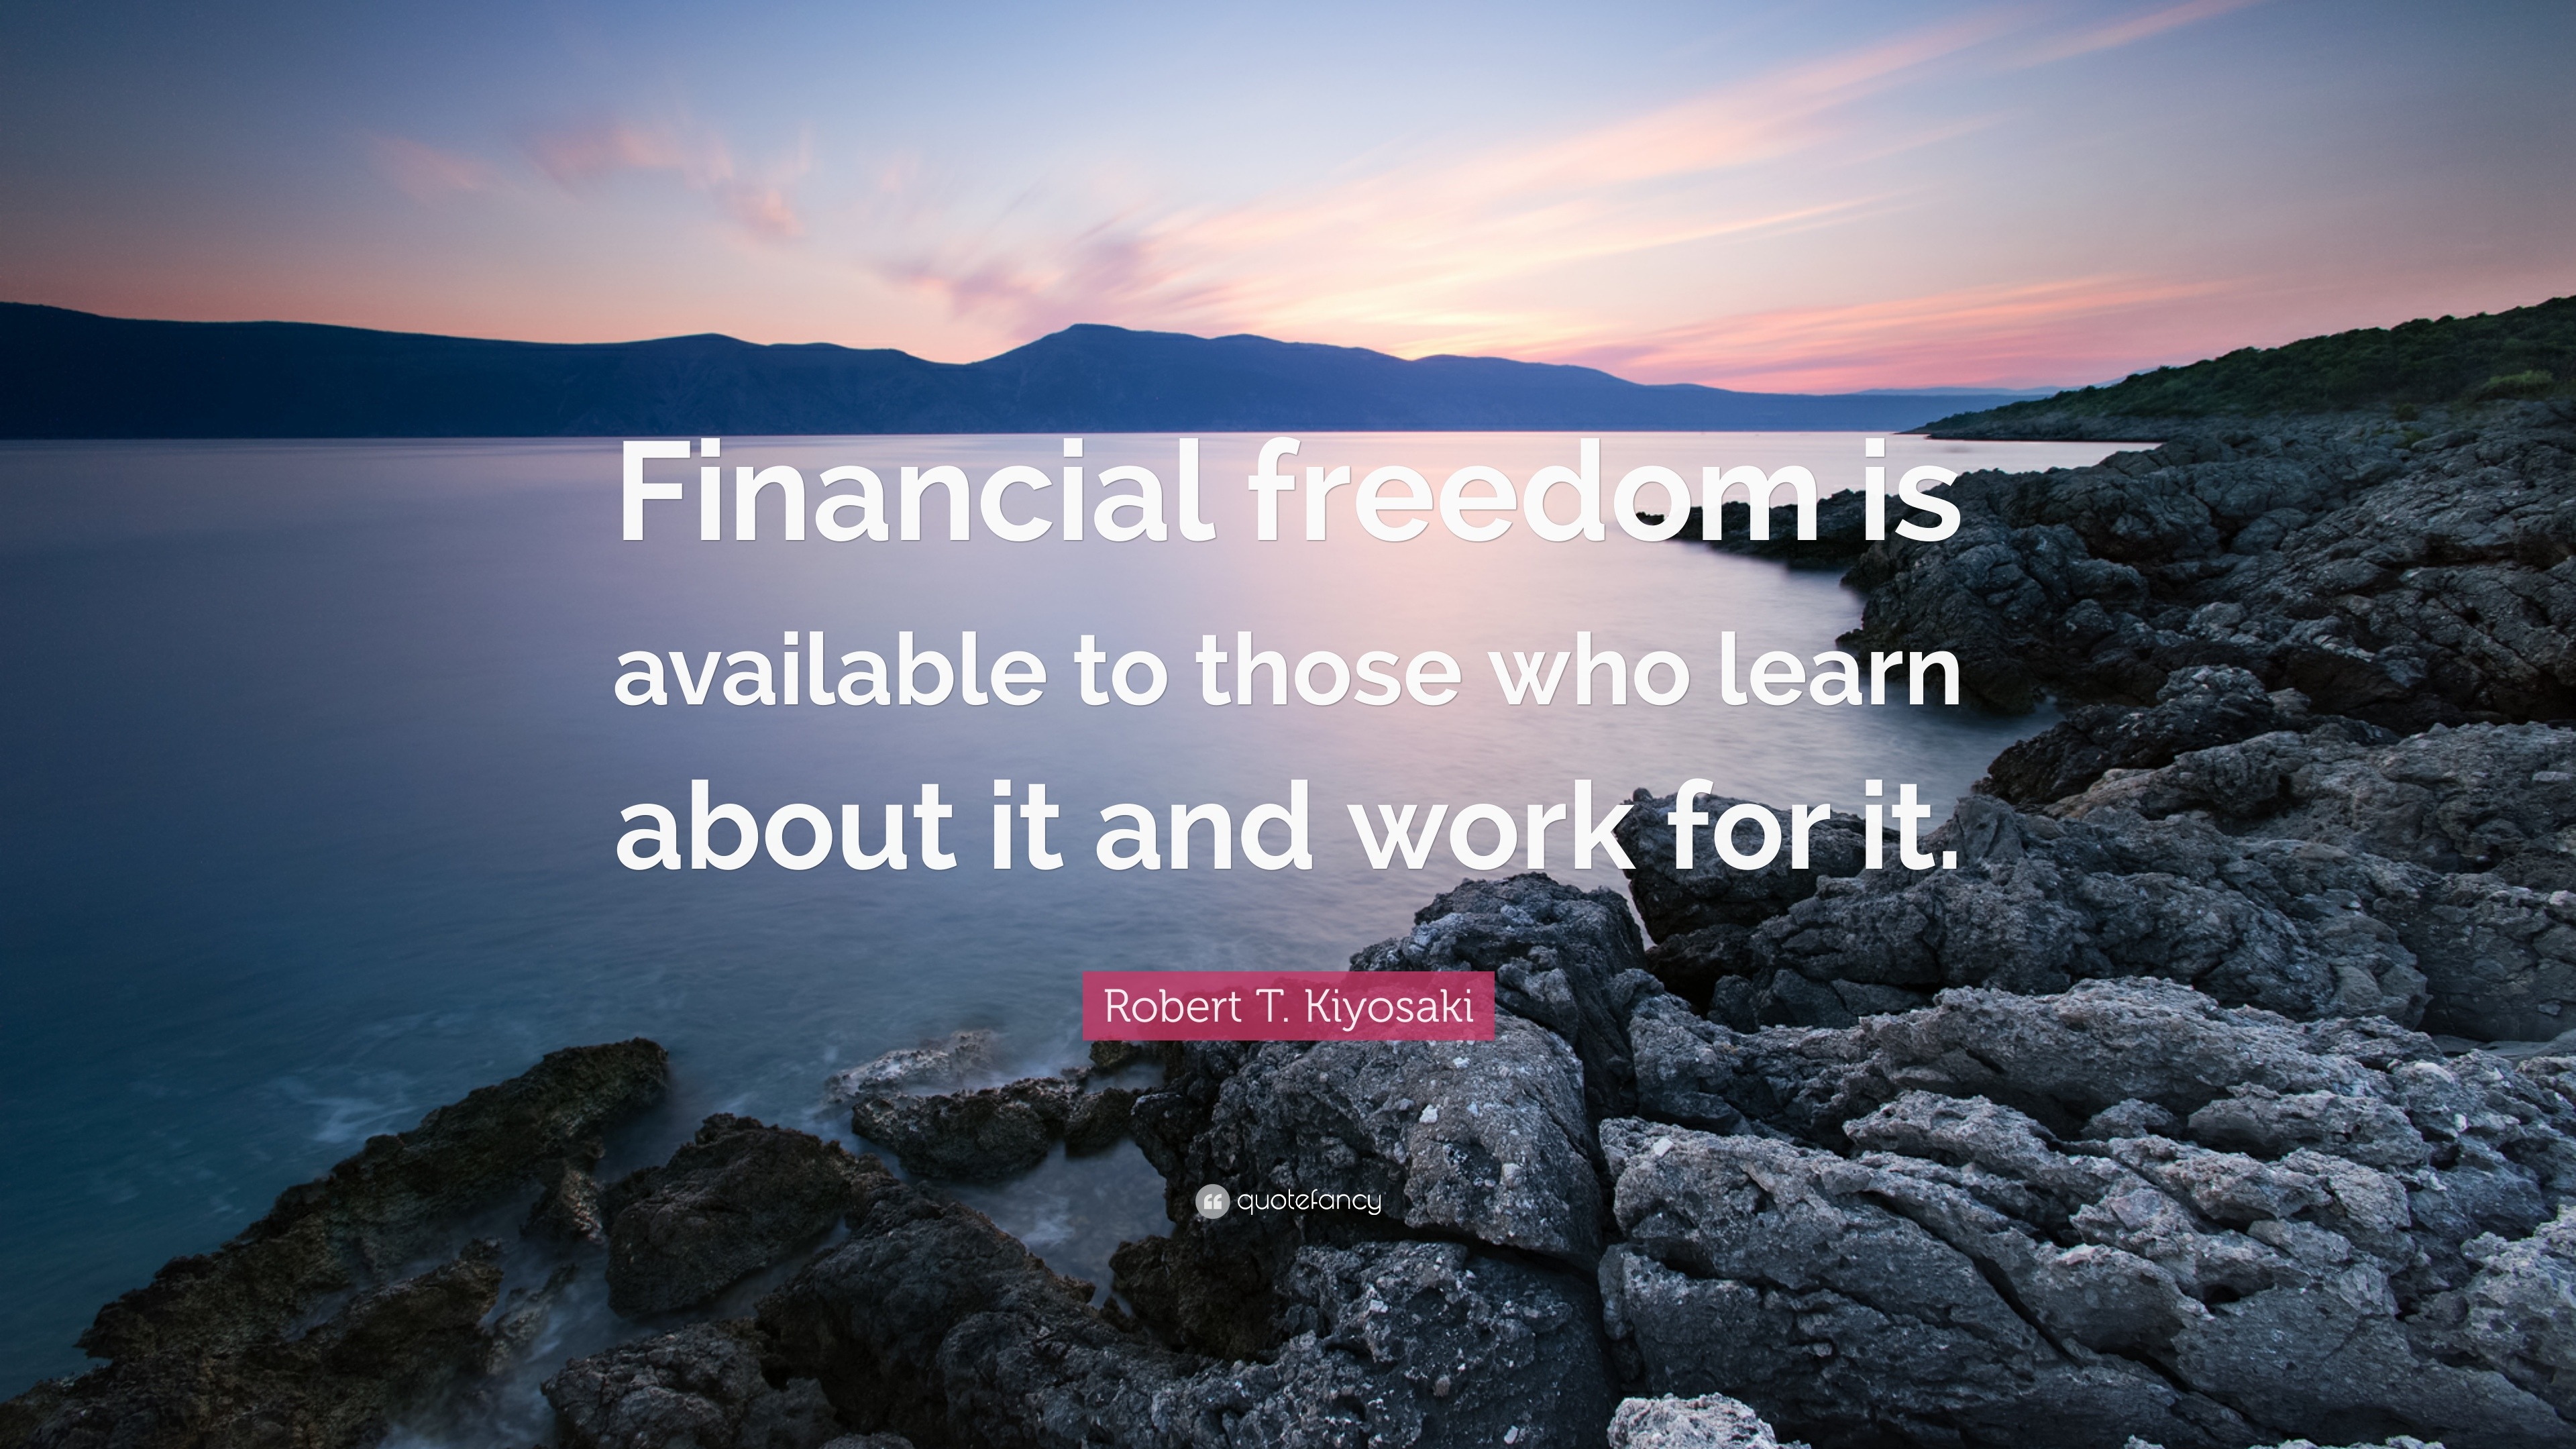 Robert T. Kiyosaki Quote: “Financial freedom is available to those who